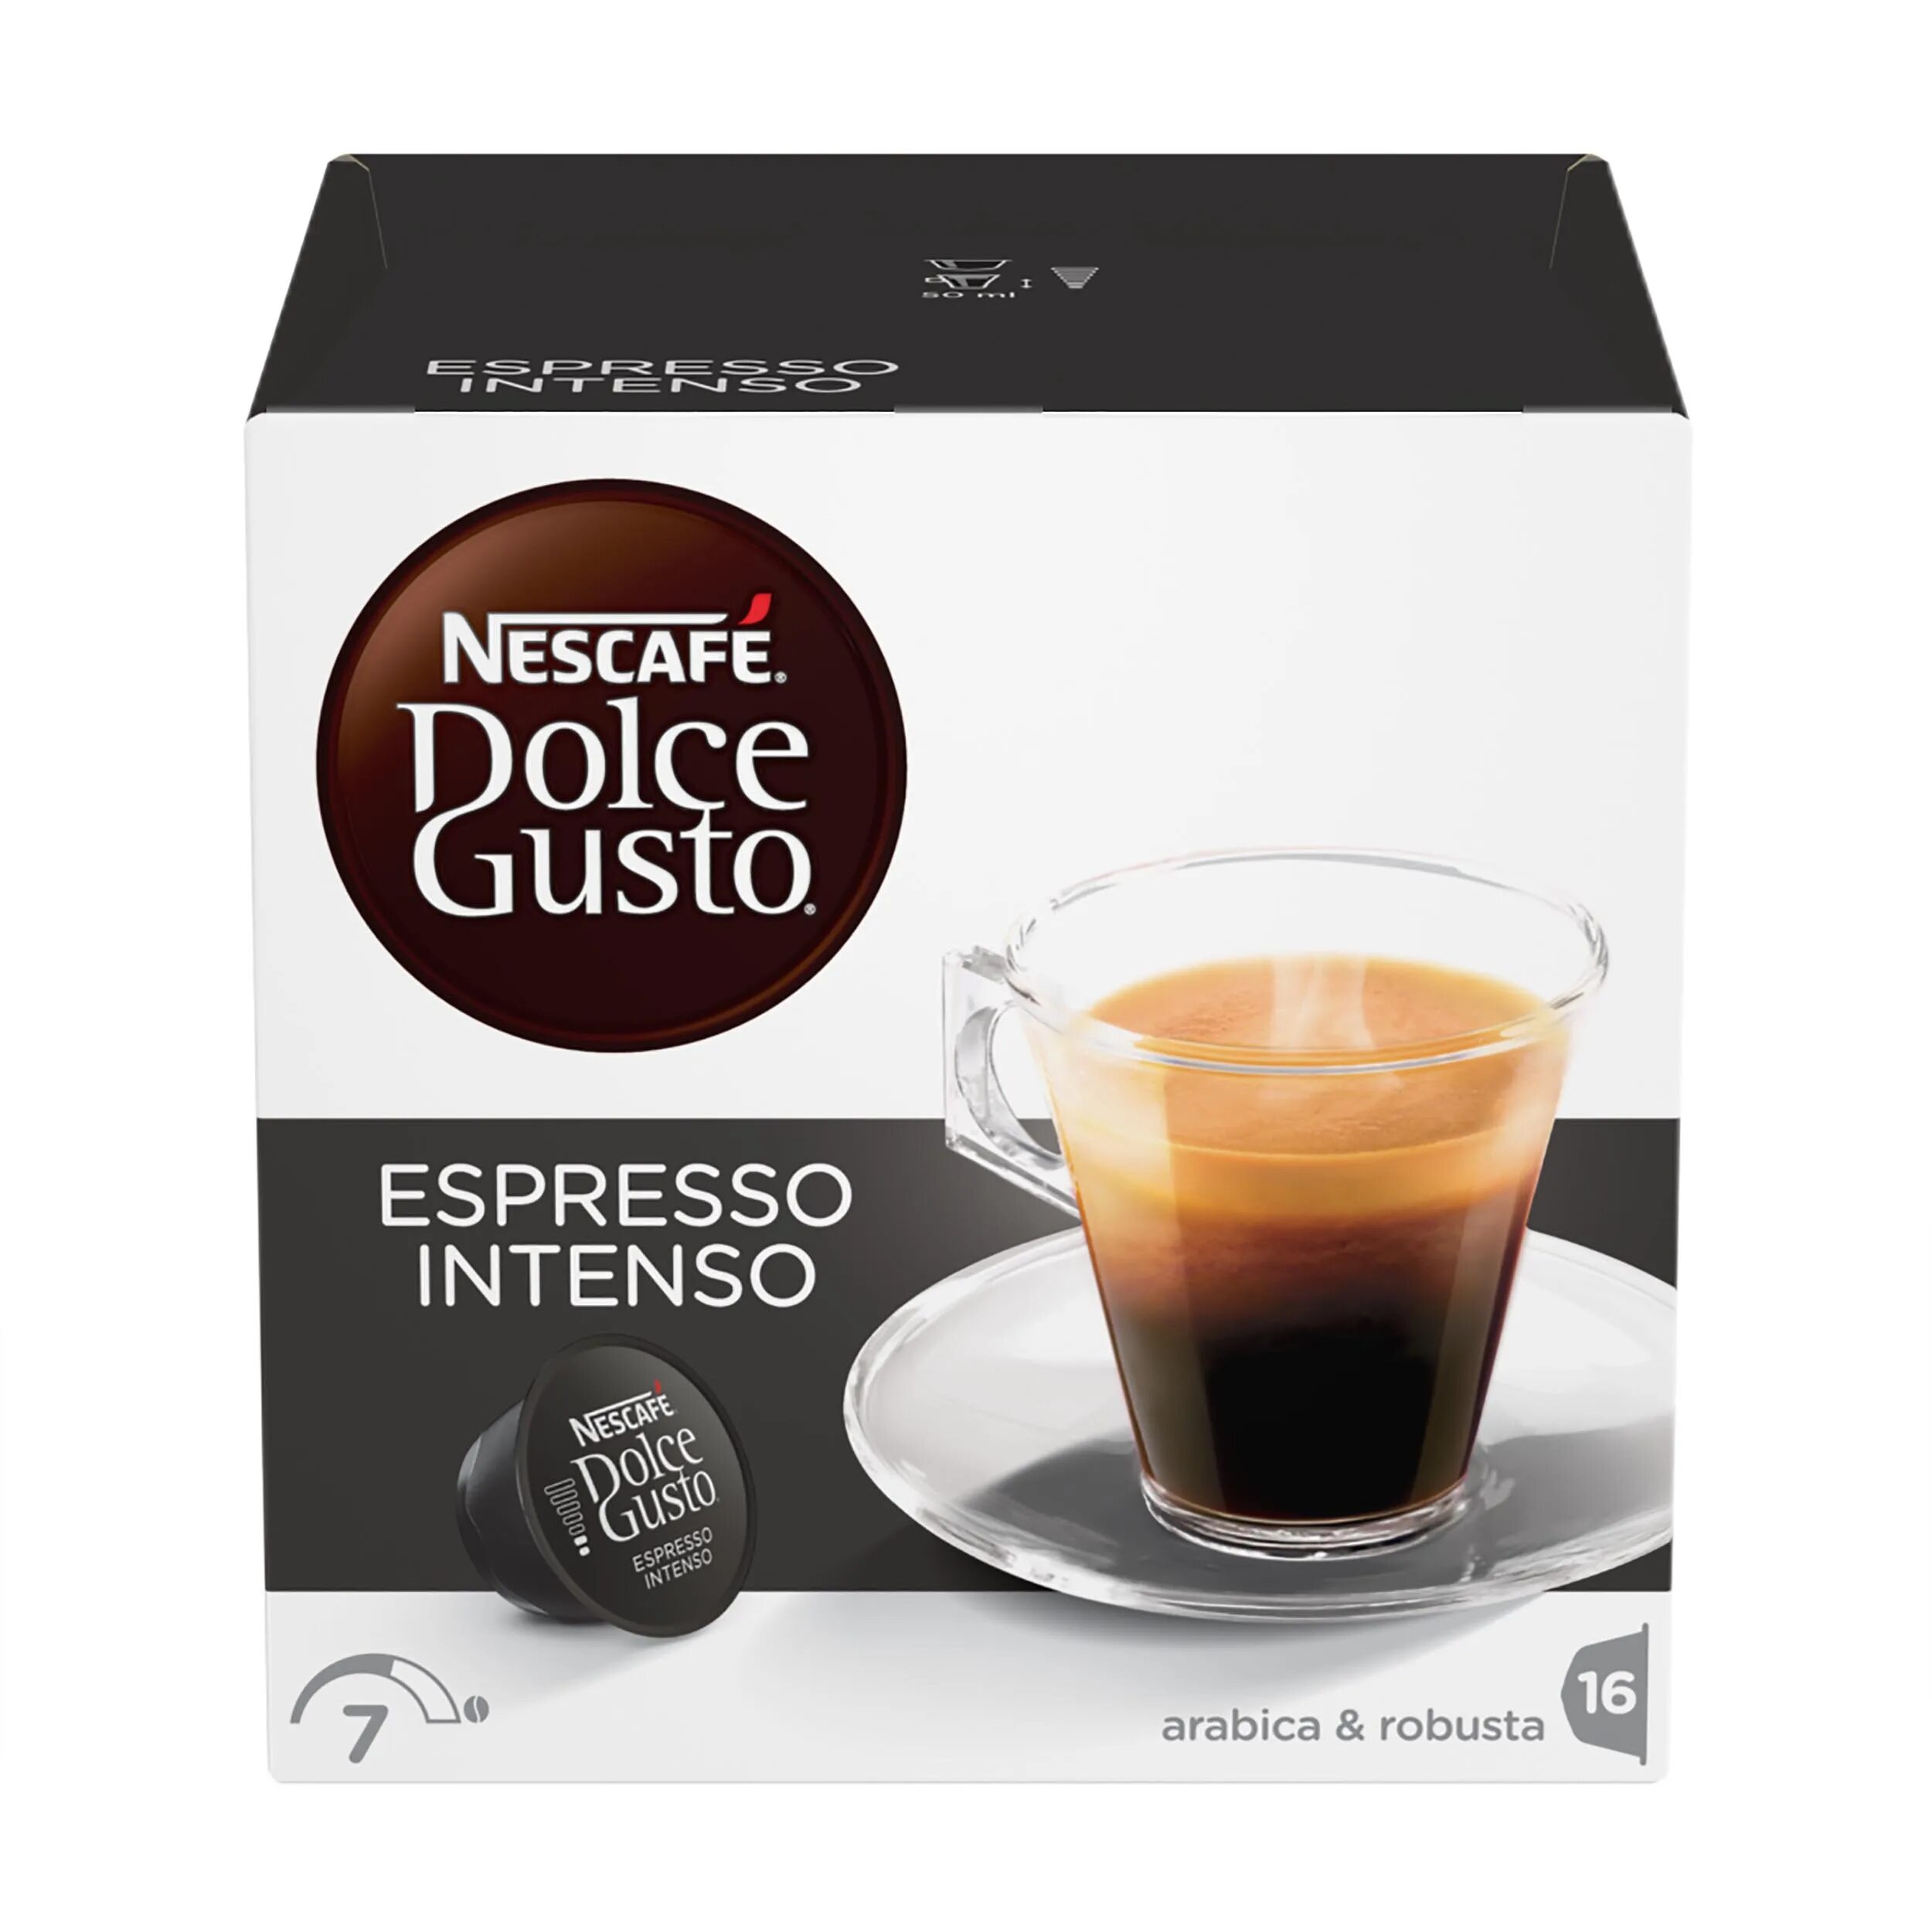 Espresso intenso капсулы Dolce gusto. Dolce gusto капсулы Espresso. Nescafe Dolce gusto капсулы. Офе в капсулах Nescafe Dolce gusto Espress.